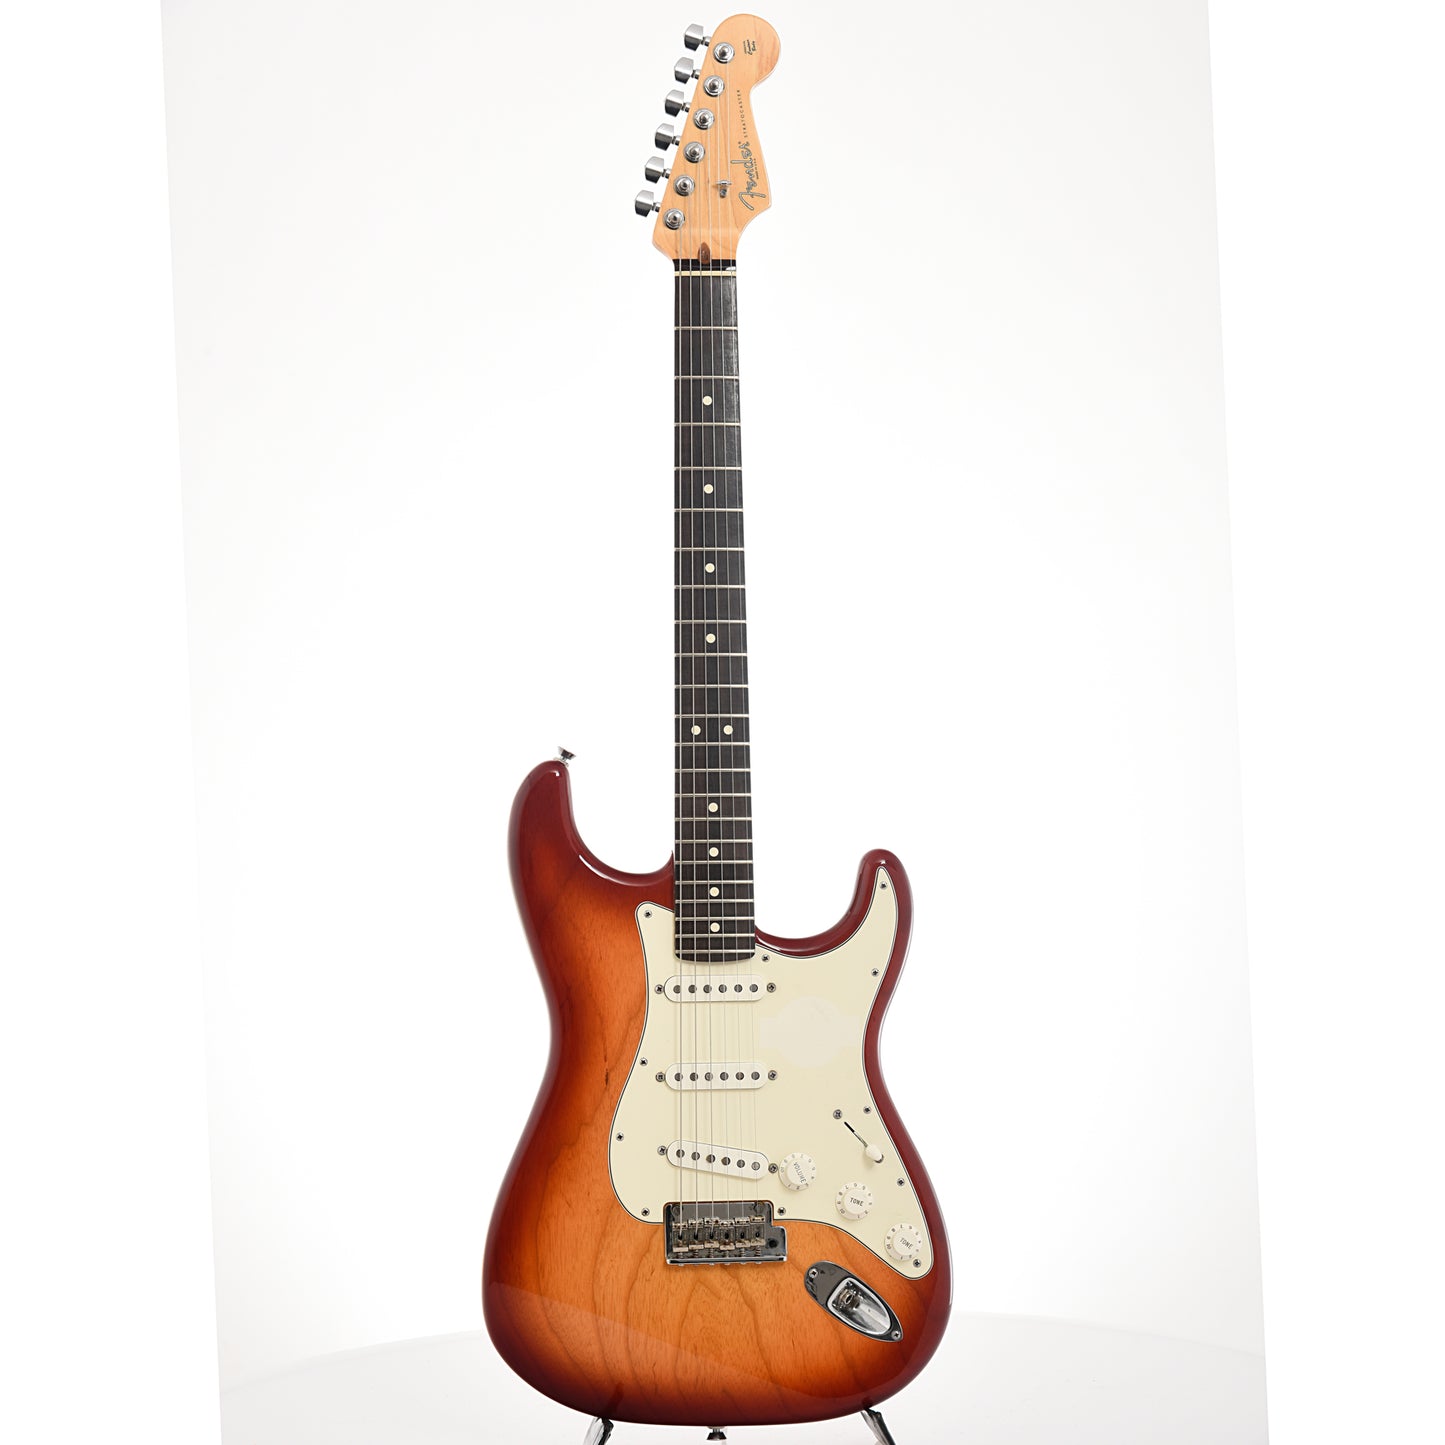 Fender New American Standard Stratocaster Electric Guitar (2009)